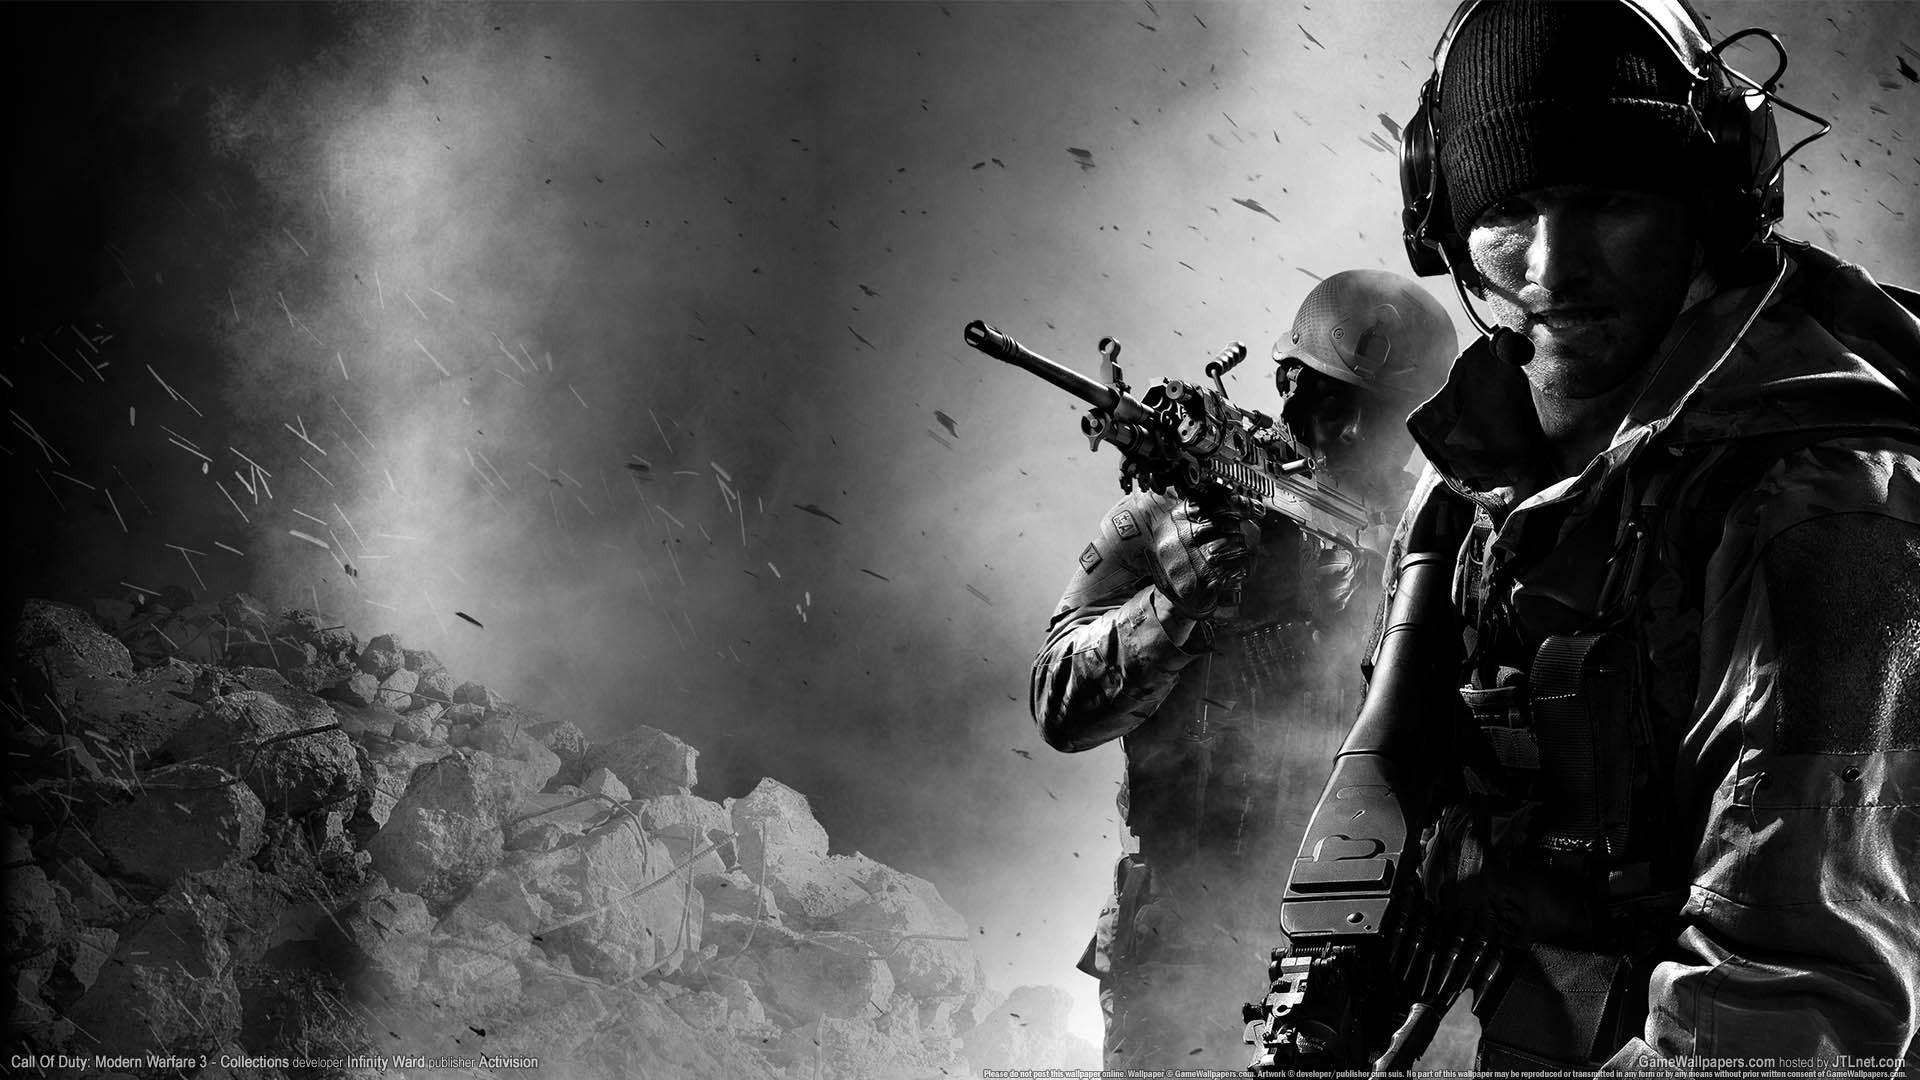 Call Of Duty: Modern Warfare 3 - Collections achtergrond 01 1920x1080